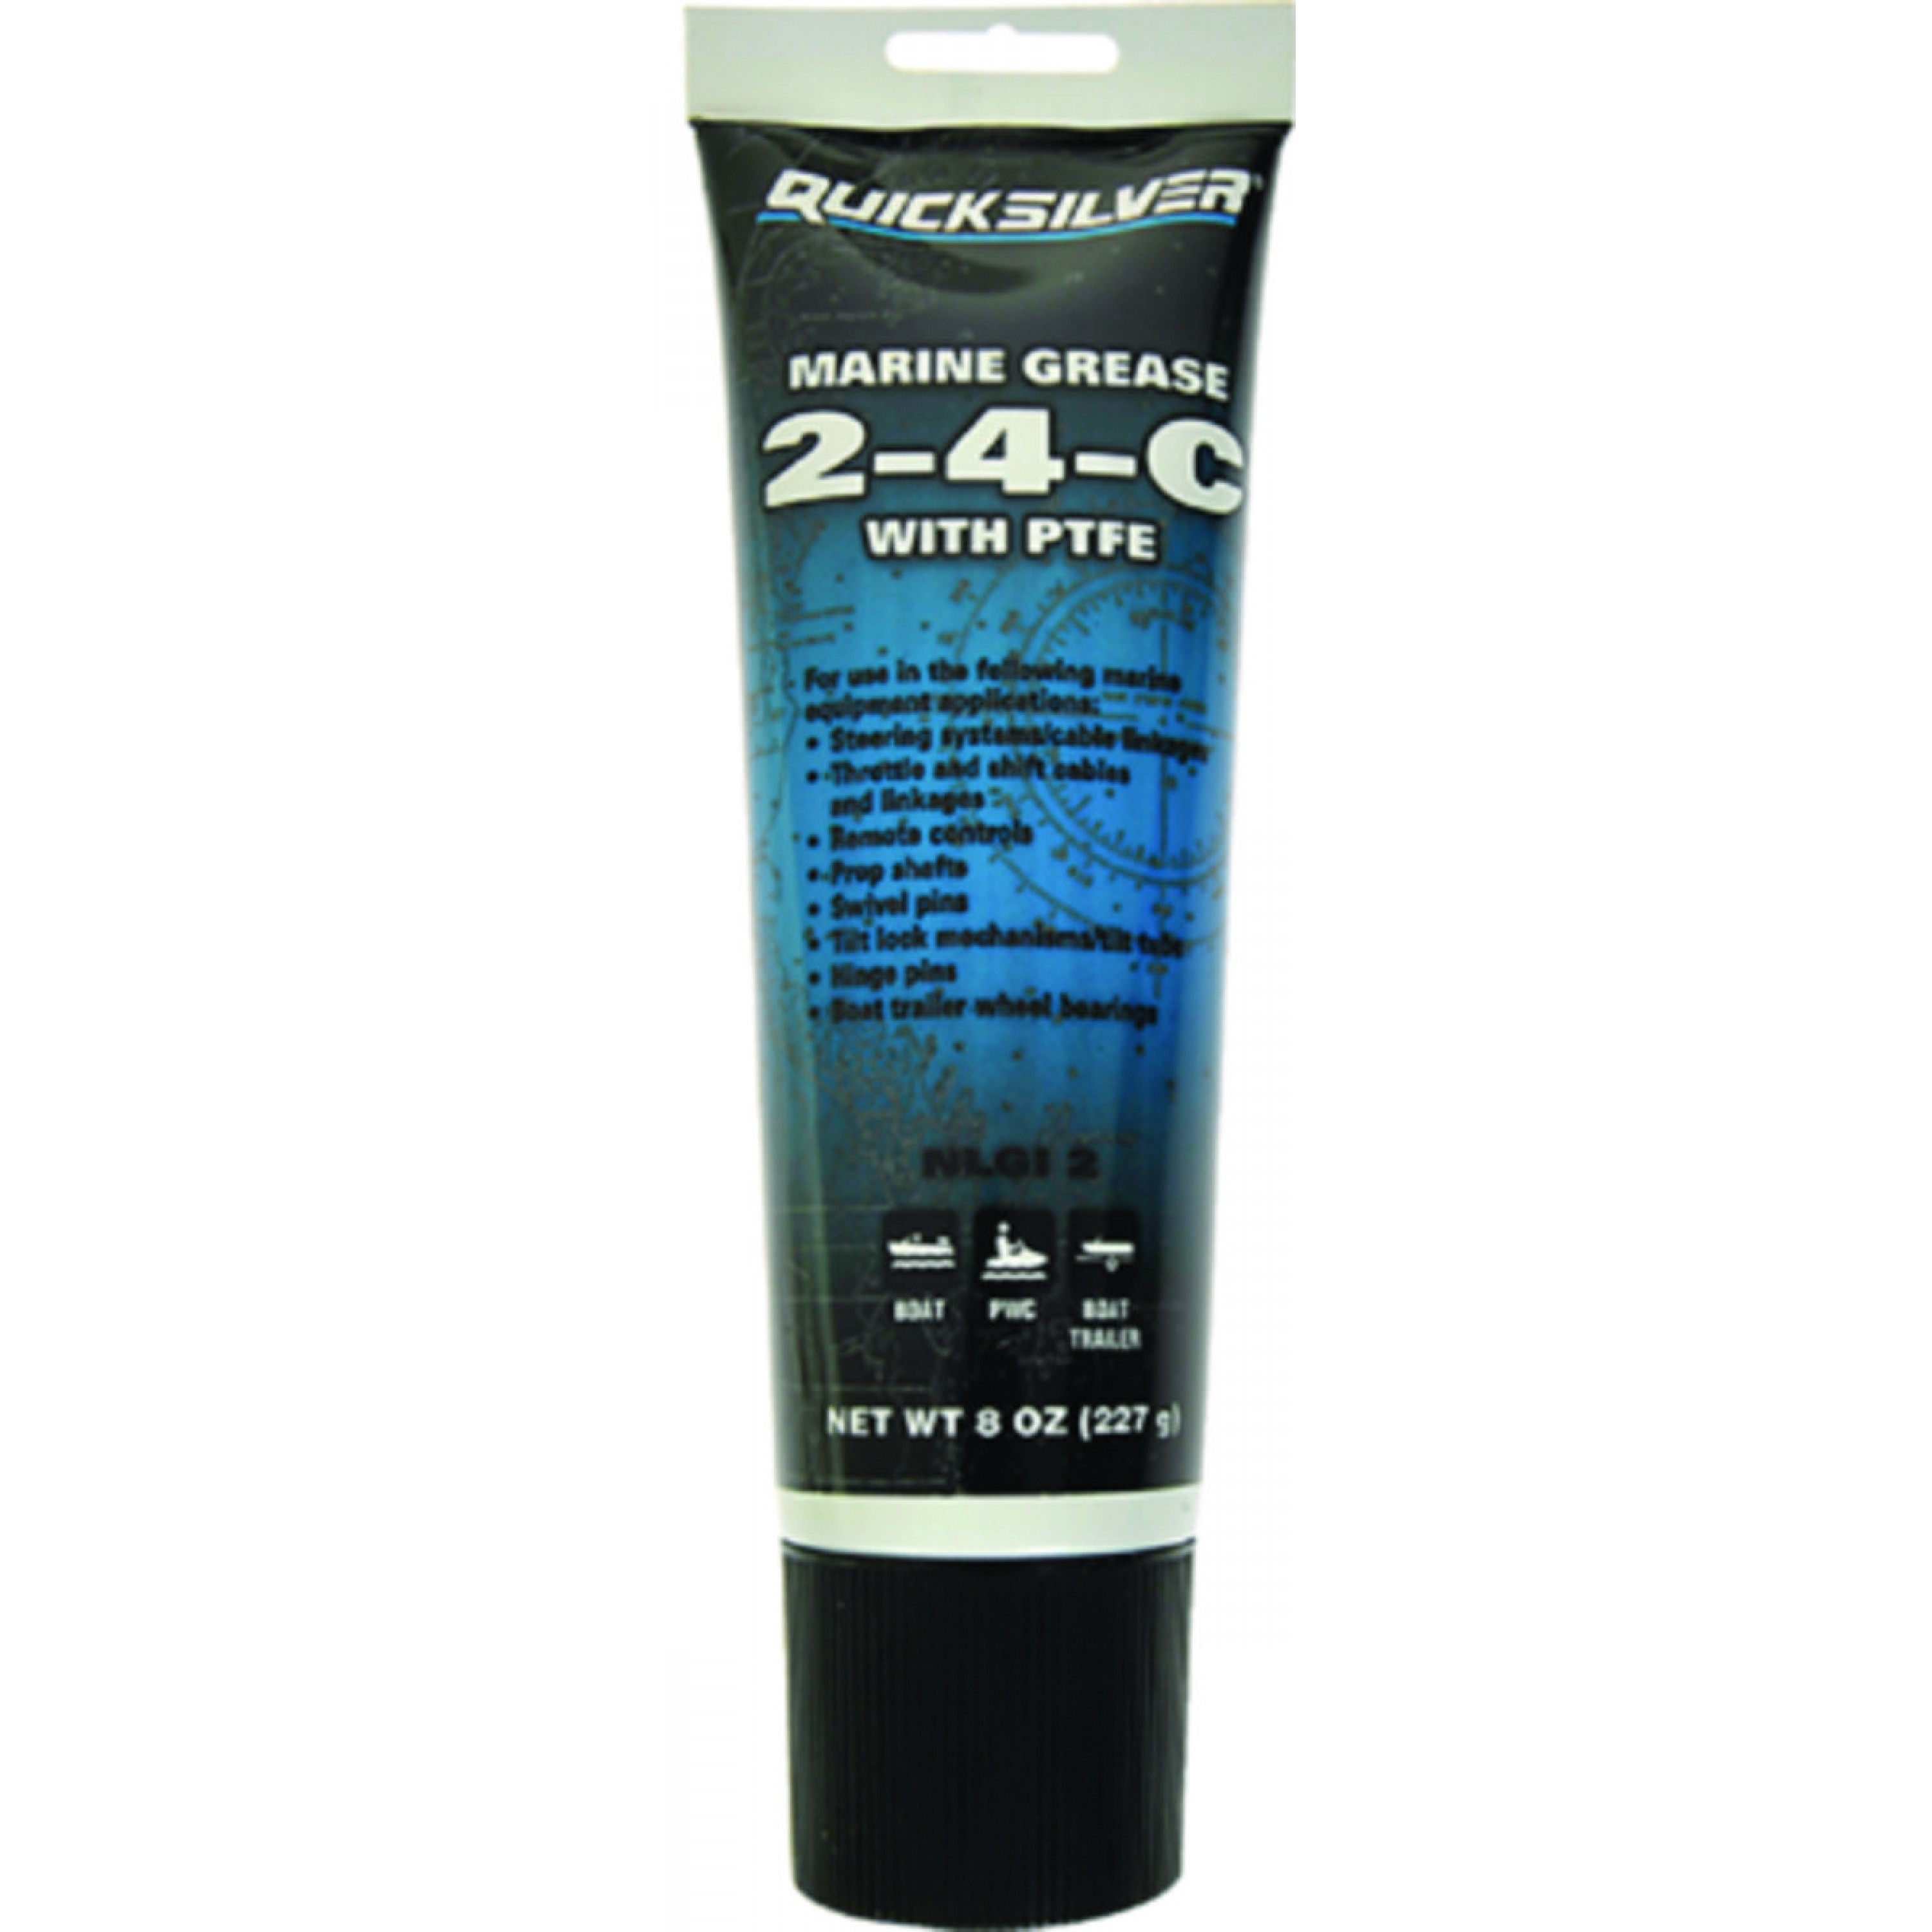 LUBE 2-4-C 8OZ  MARINE GREASE WITH PTFE